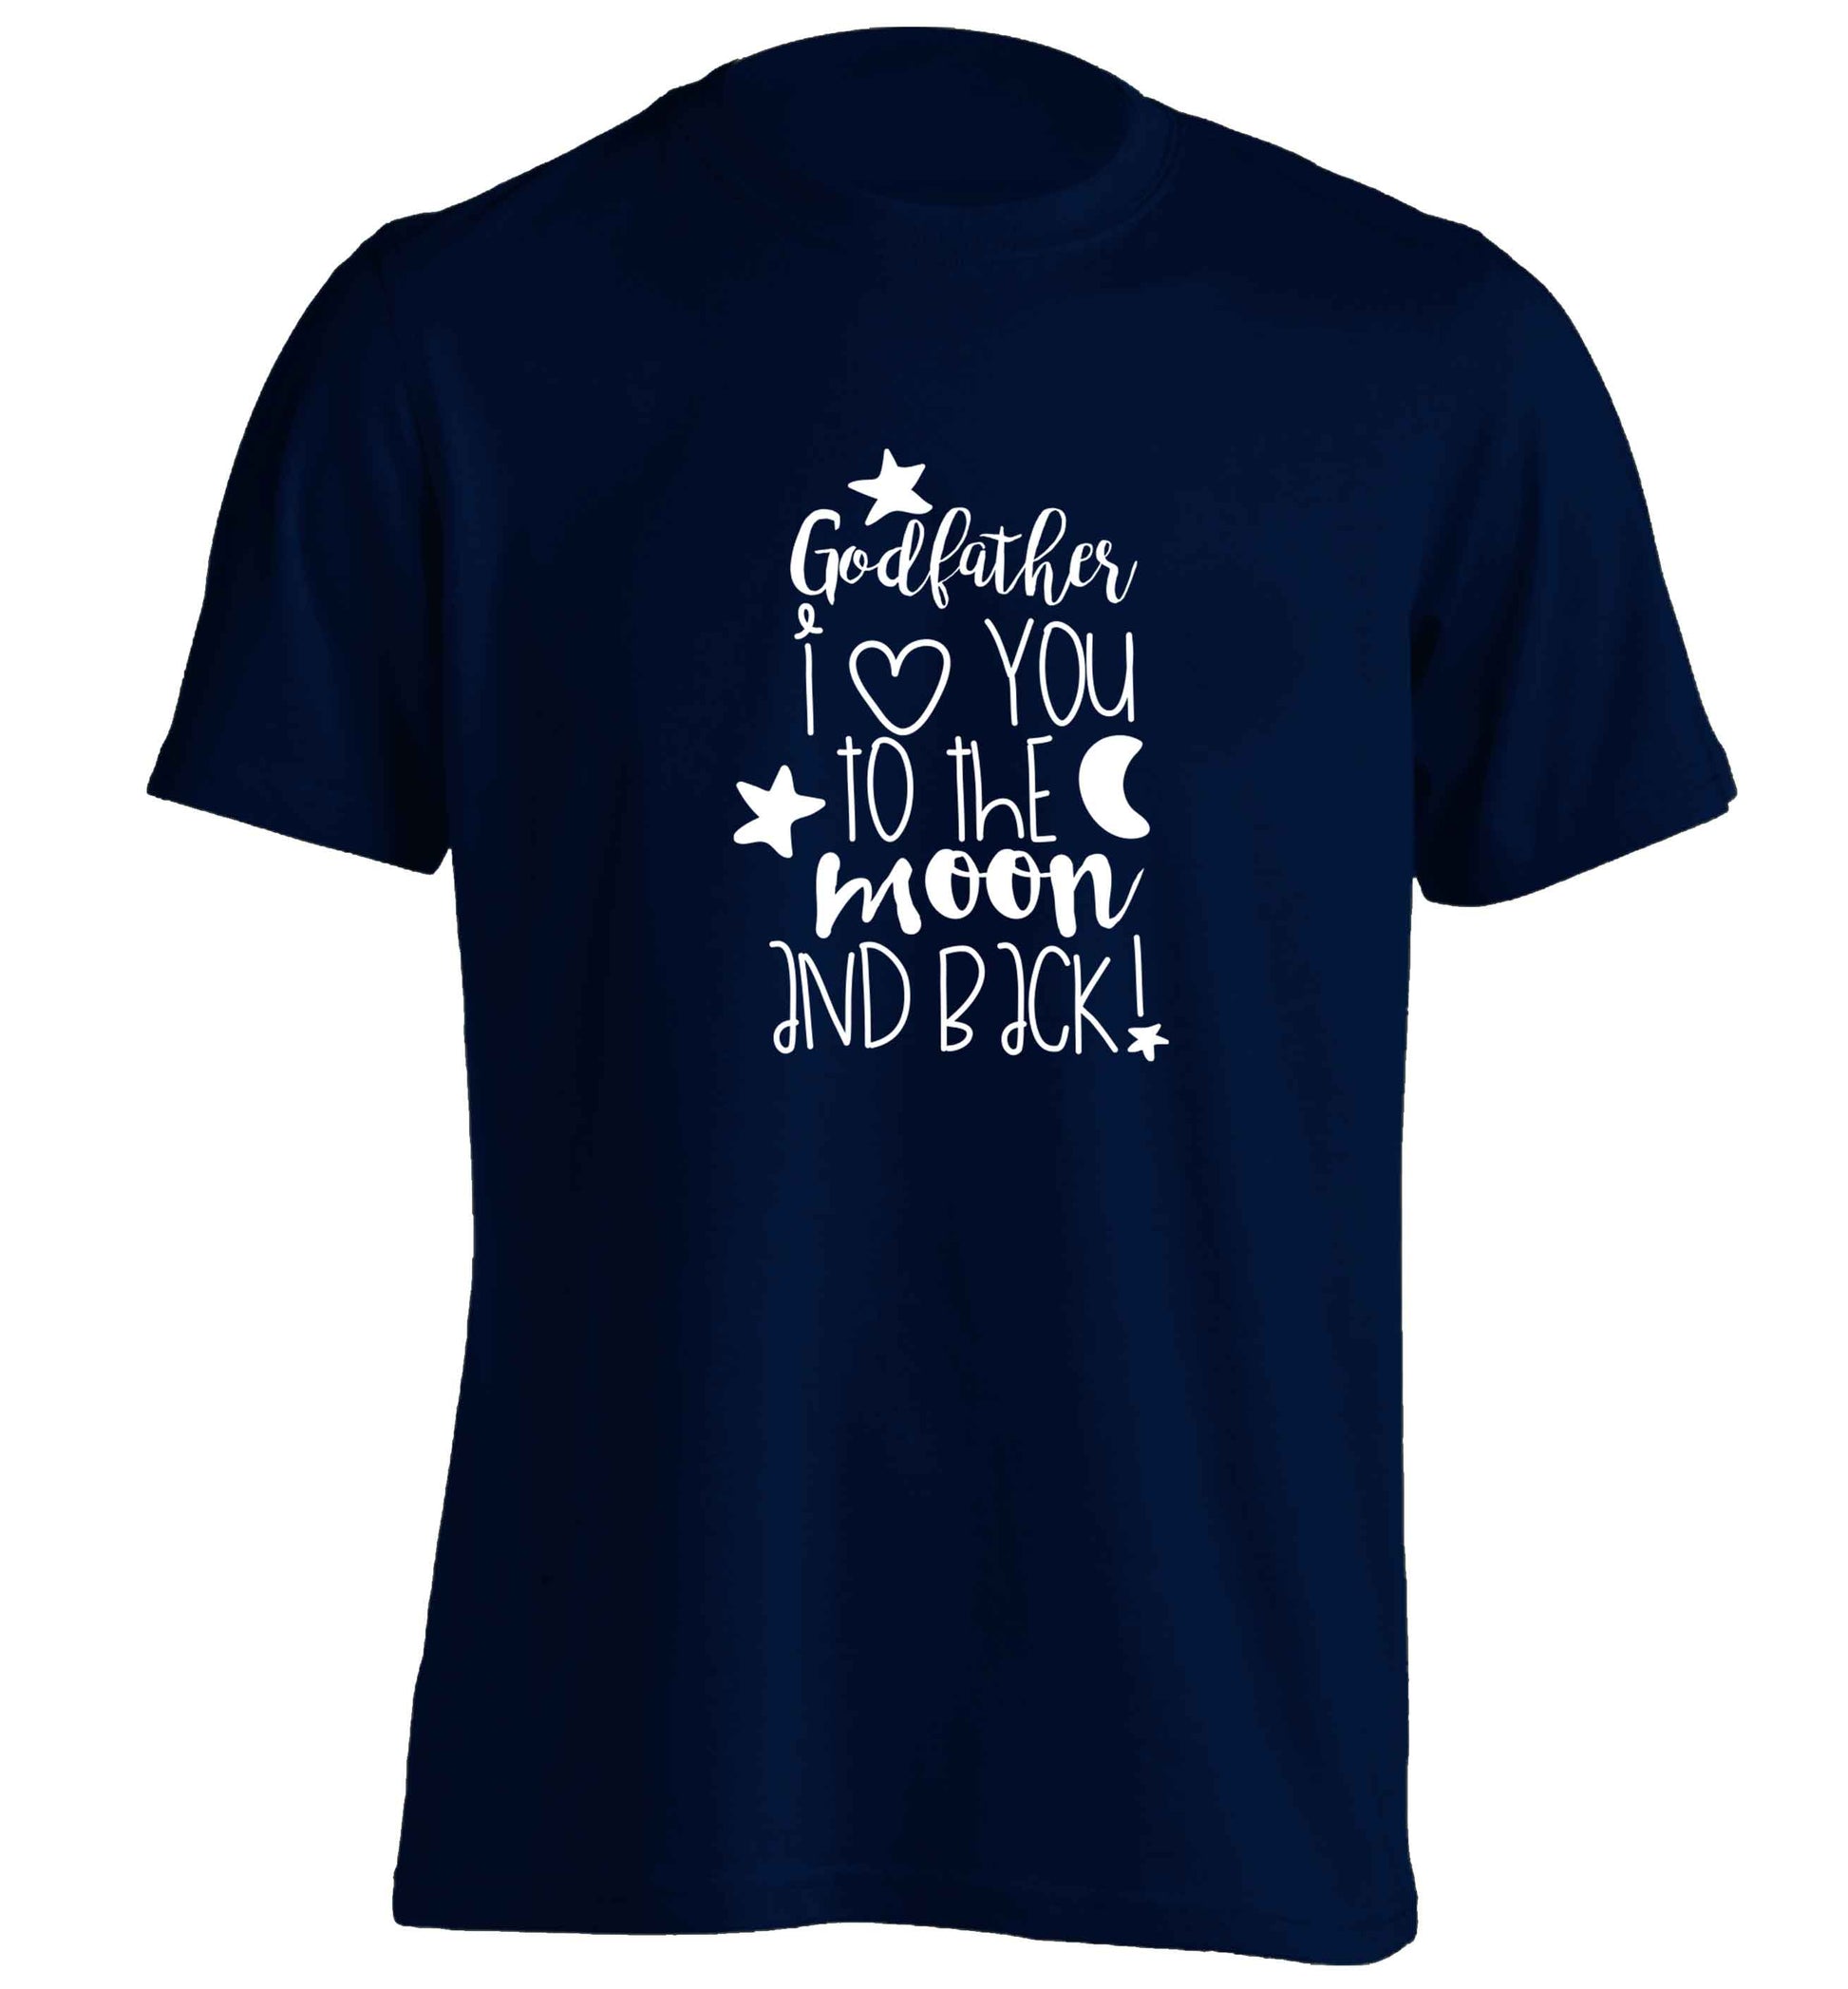 Godfather I love you to the moon and back adults unisex navy Tshirt 2XL